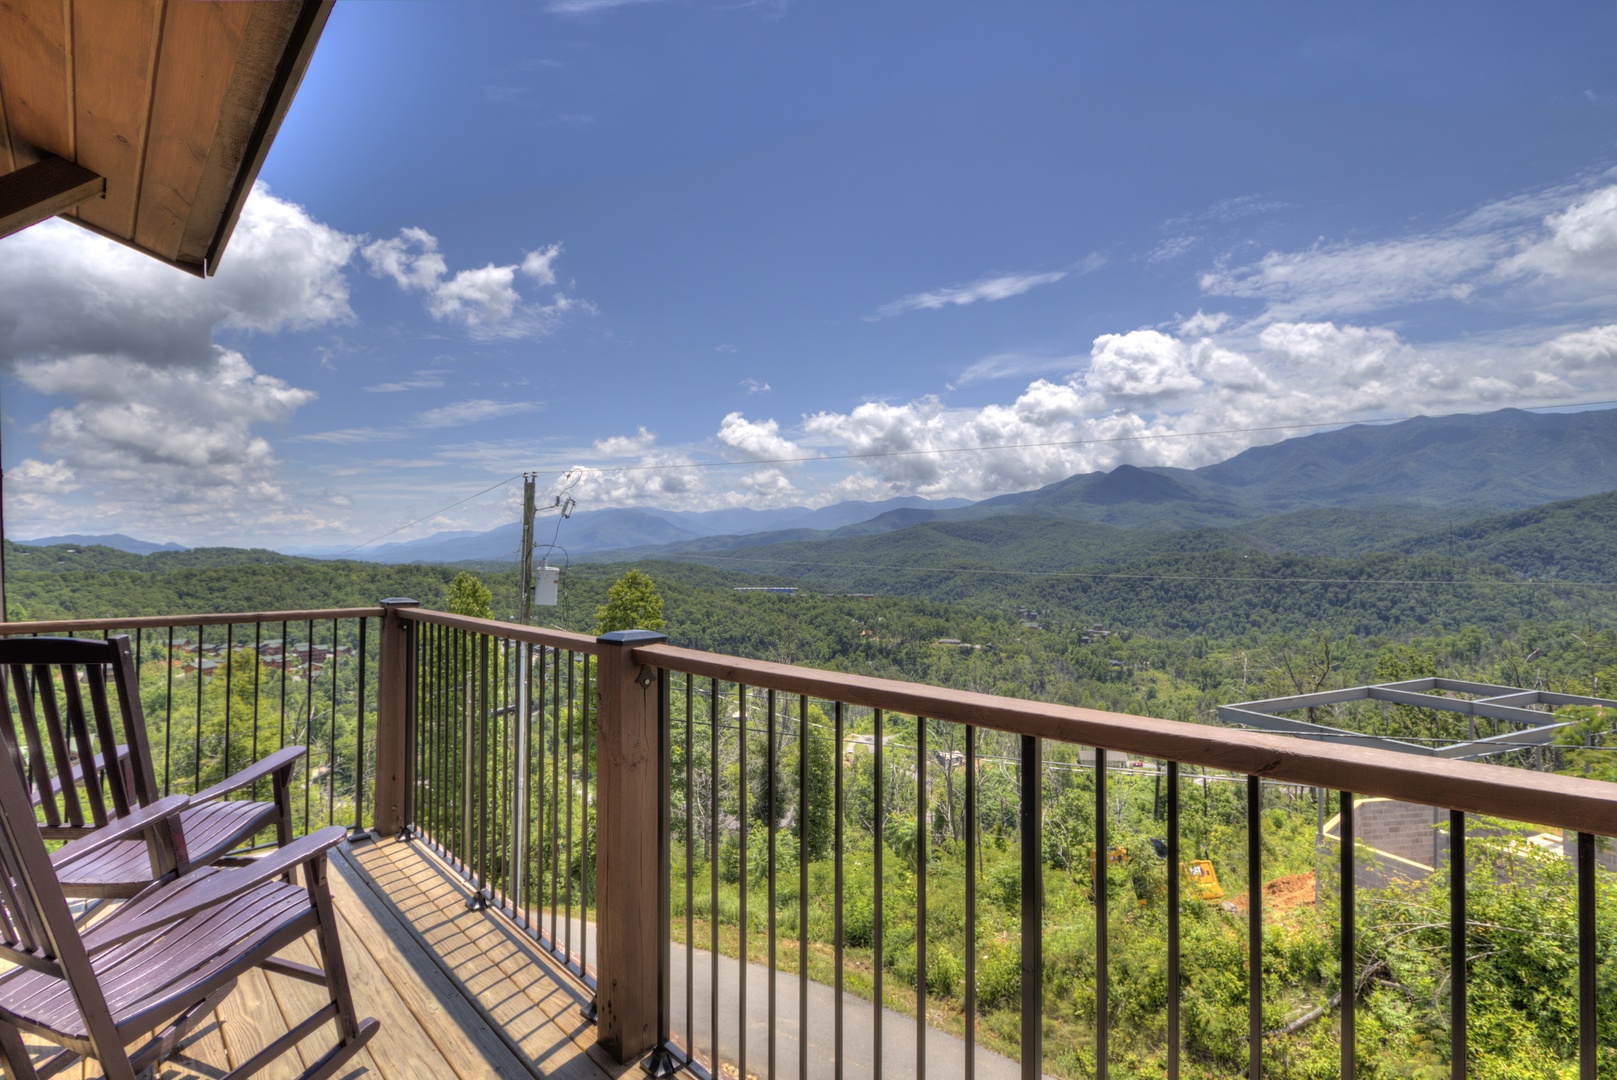 View from the deck rocking chairs at The Best View Lodge, a 5 bedroom cabin rental located in gatlinburg